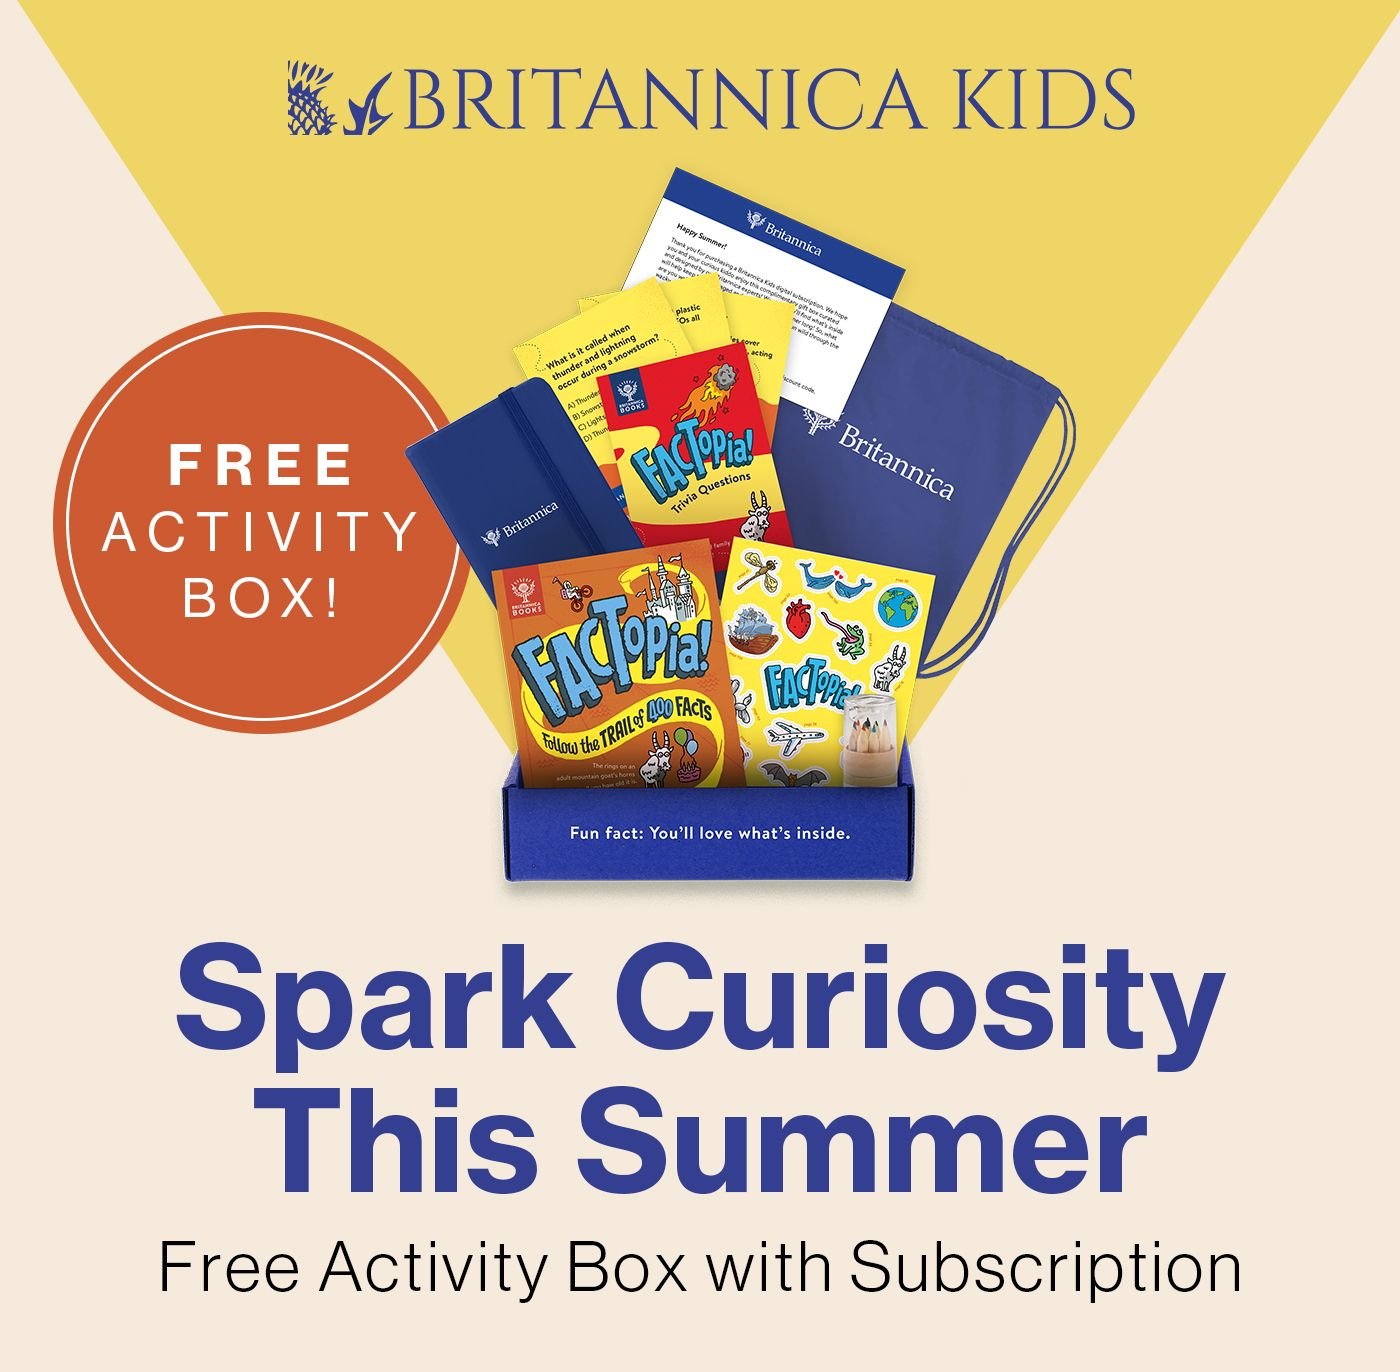 Spark Curiosity This Summer! Free Activity Box with Subscription.